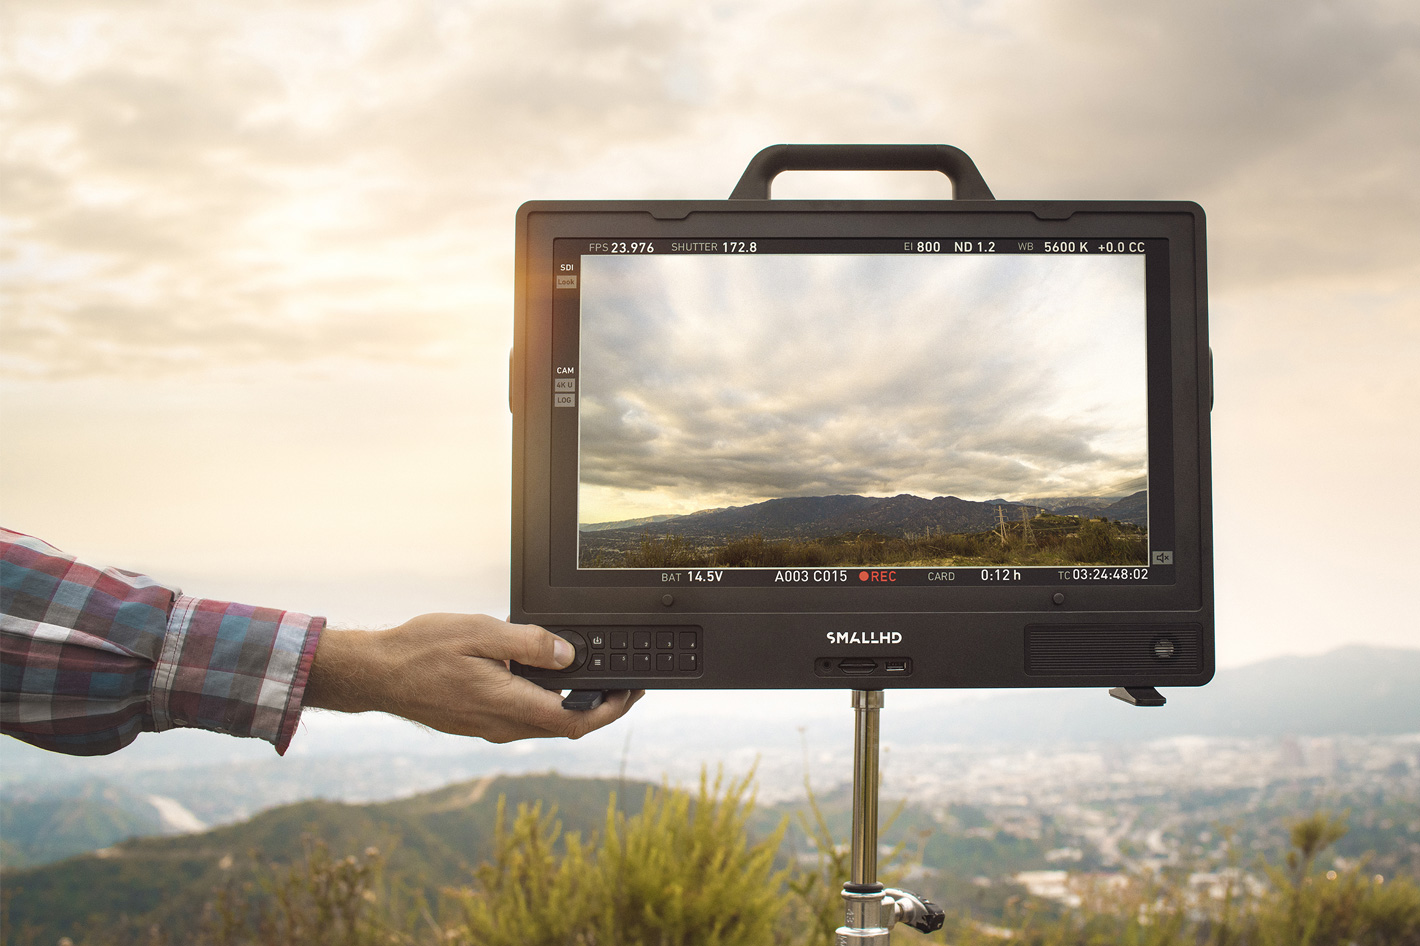 SmallHD’s Cine 18 introduced as the new monitor for everywhere